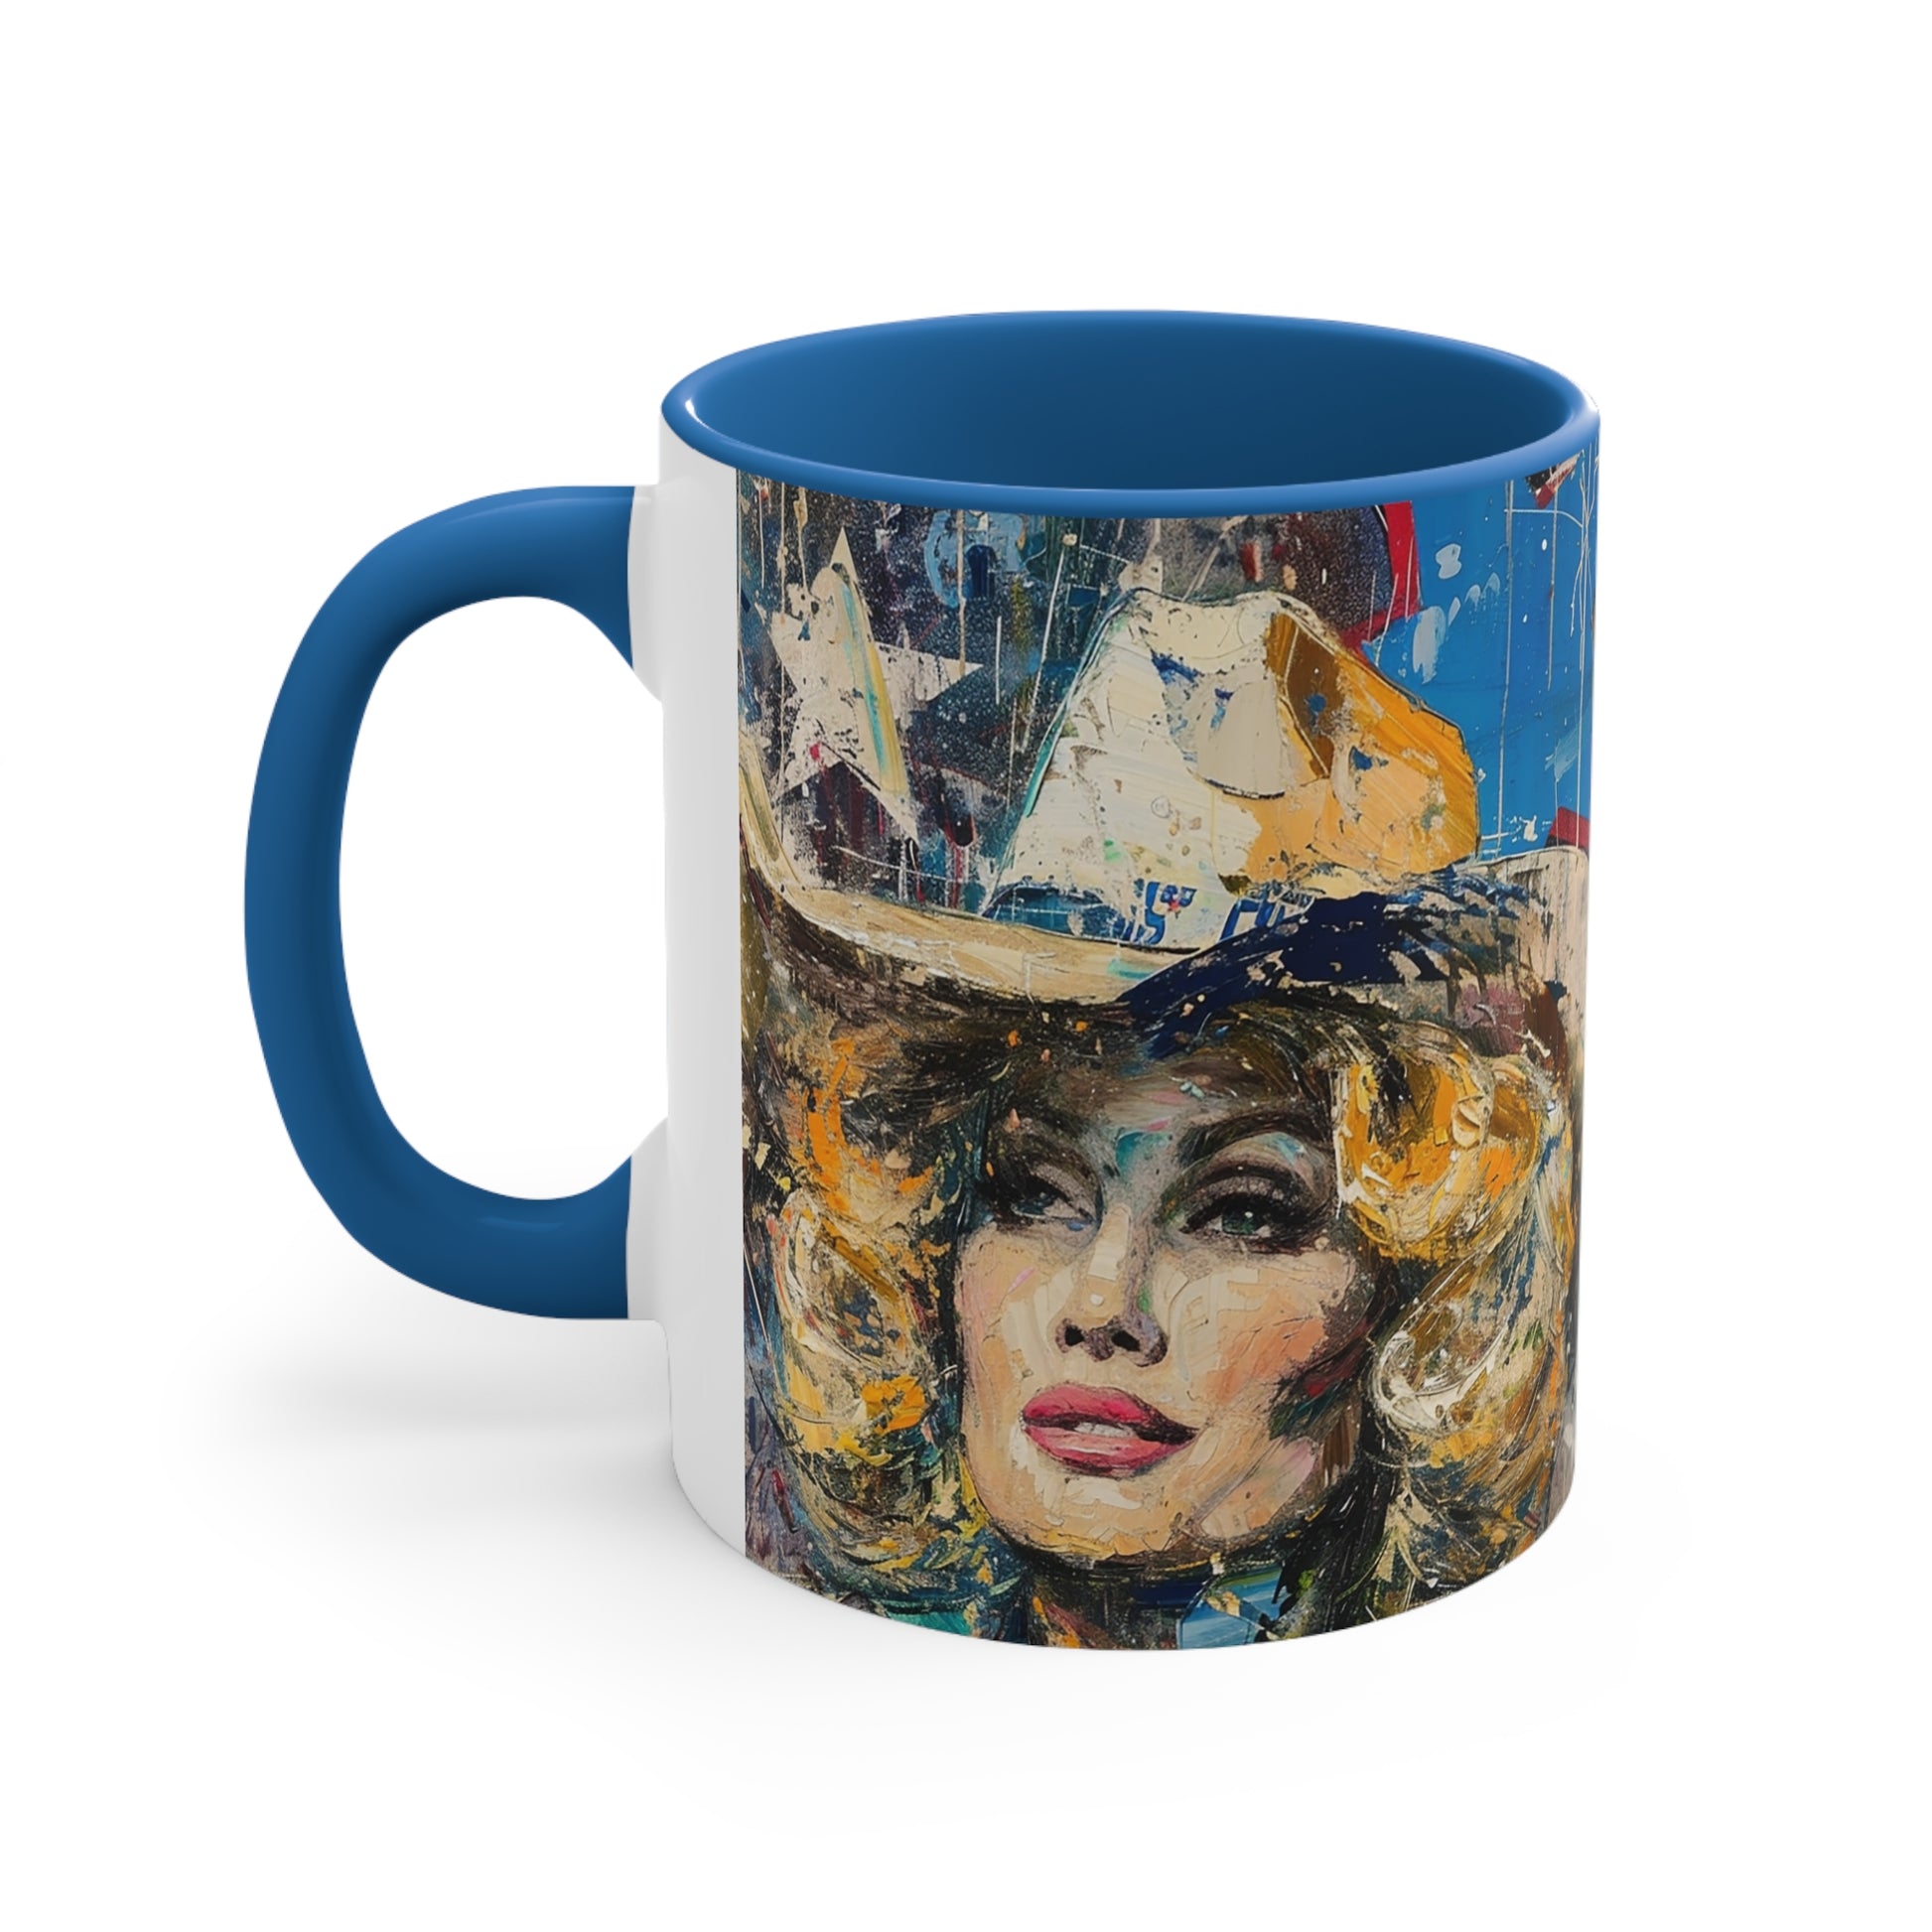 Accent Coffee Mug, 11oz - Country Queen blue side